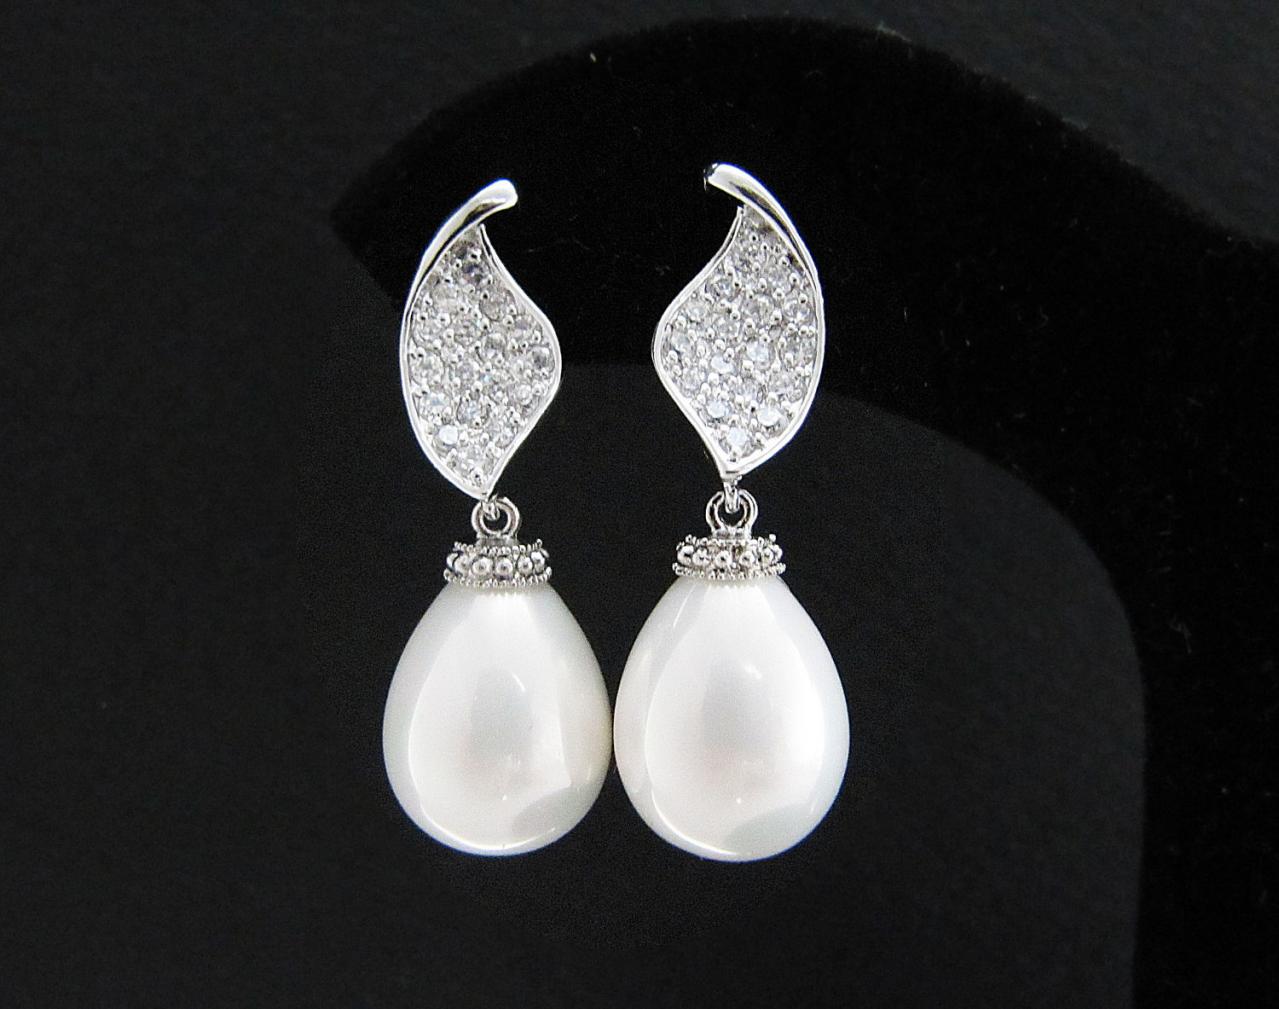 Bridal Earrings Bridesmaid Earrings Rodium Plated Cubic Zirconia Ear Posts With White Shell Based Pearl (l) Tear Drops Bridal Jewelry